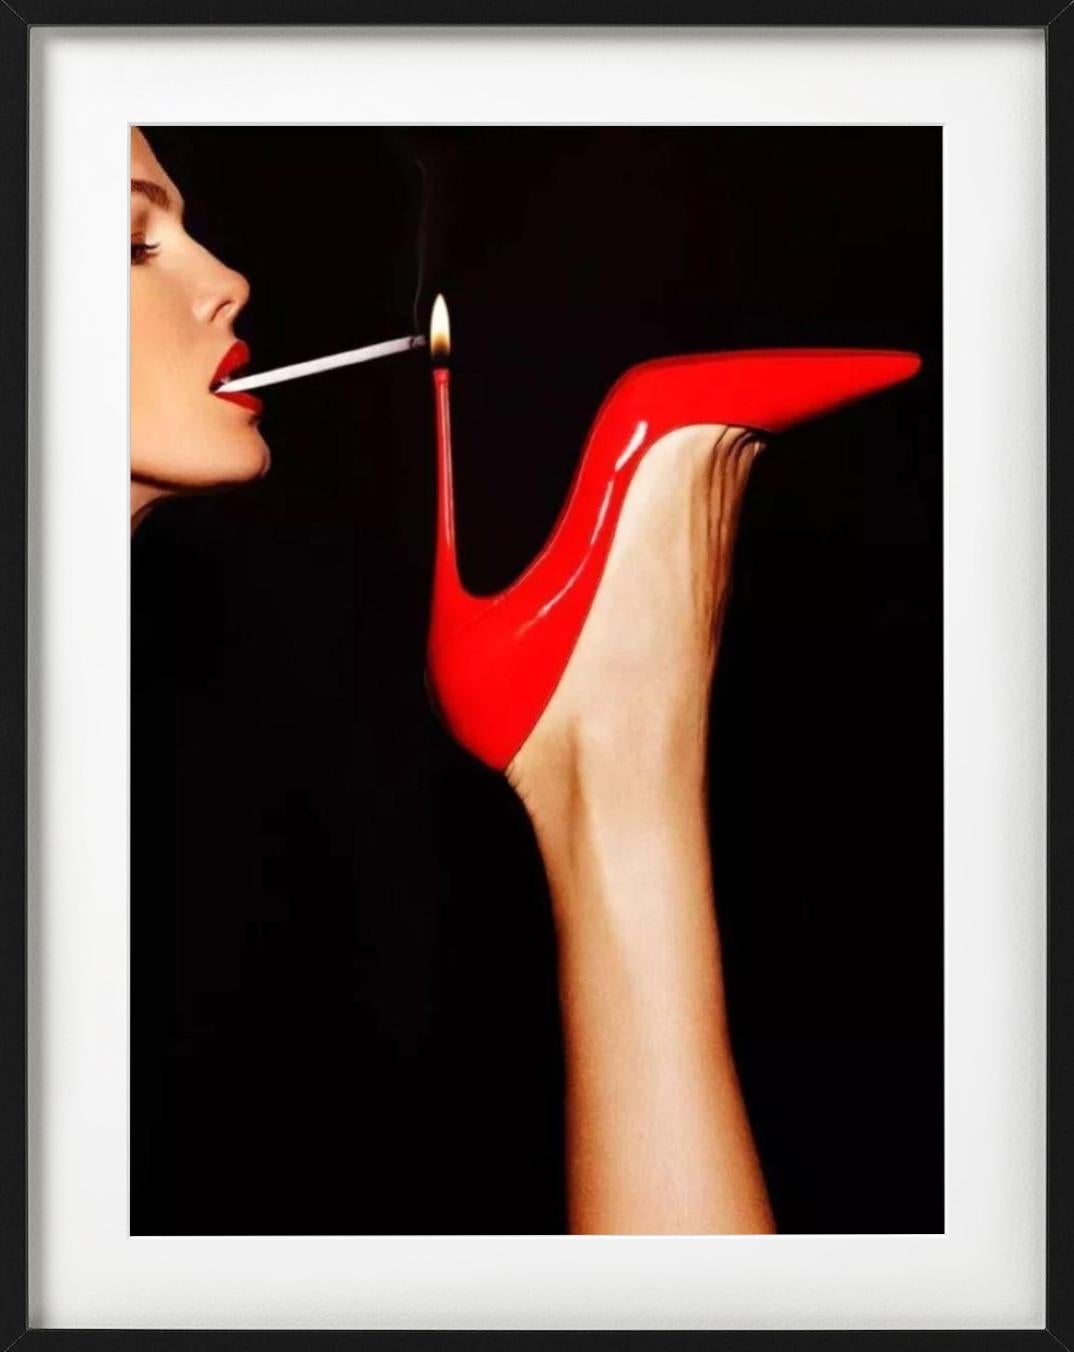 Super Slim - red shoe with a women lightning her cigarette, fine art photography For Sale 6